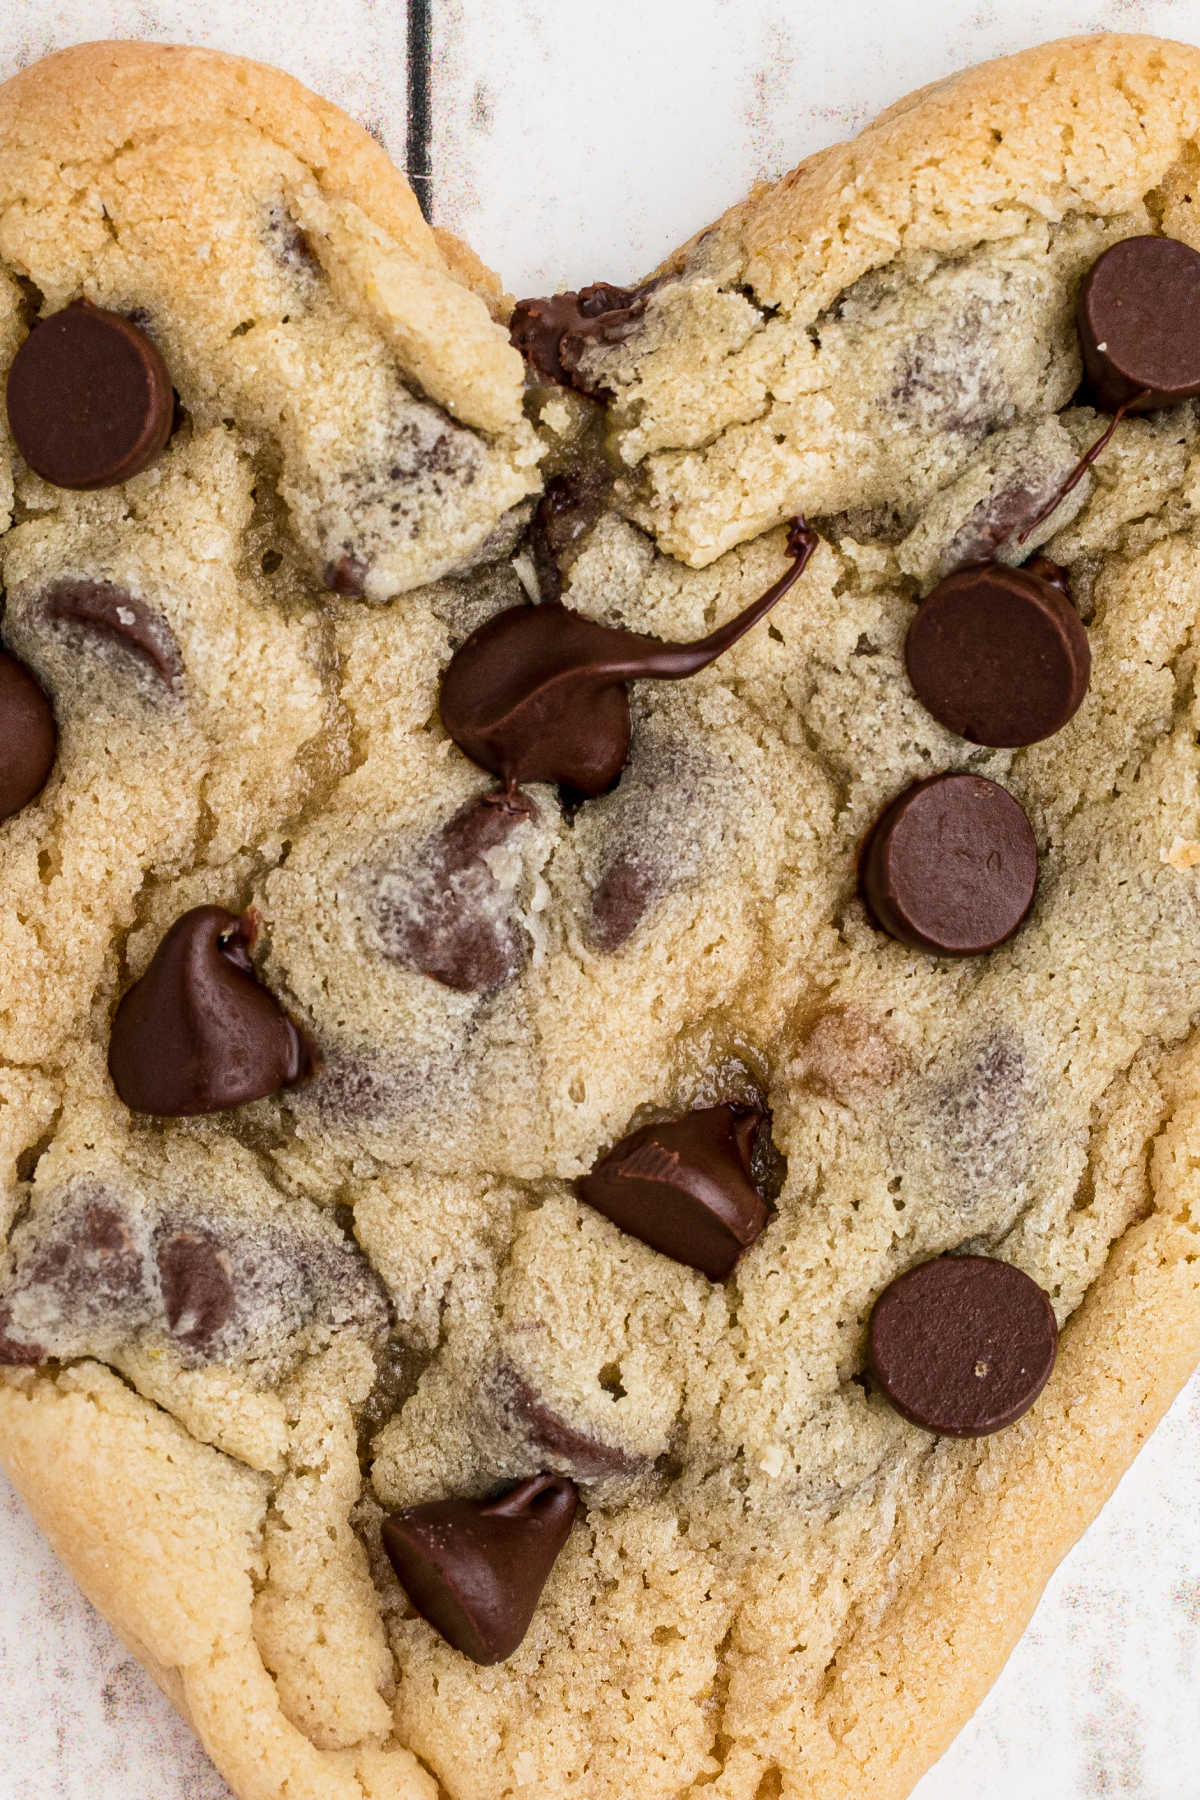 Very close up shot of a heart shaped chocolate chip cookie.